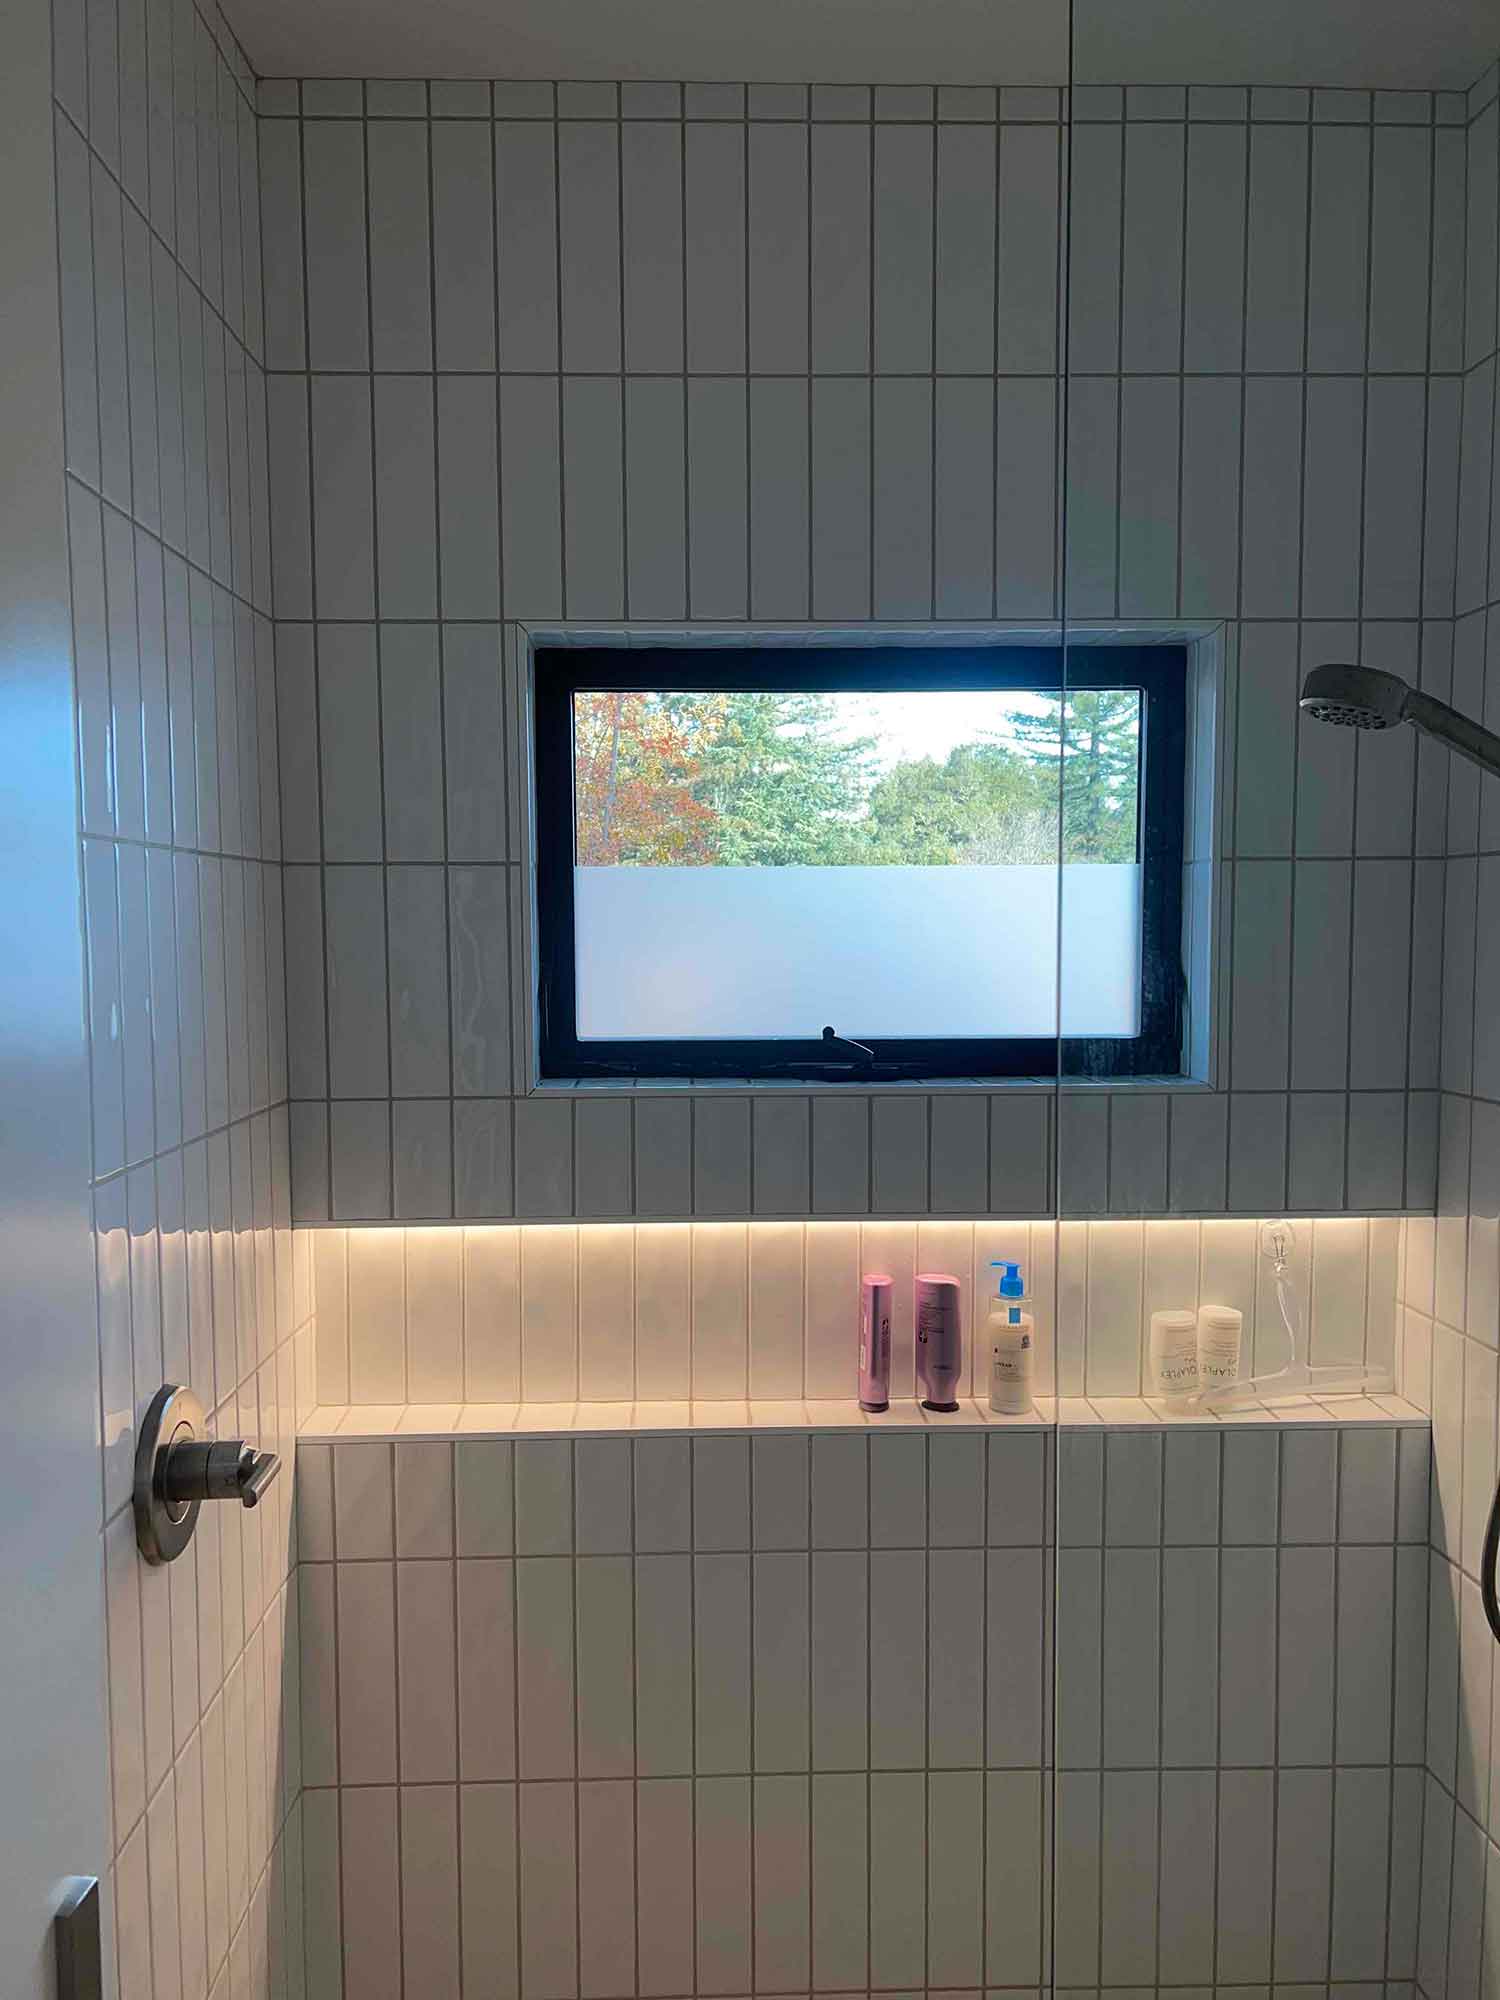 ClimatePro installed 3M privacy window tint in this bathroom in St. Helena, CA.